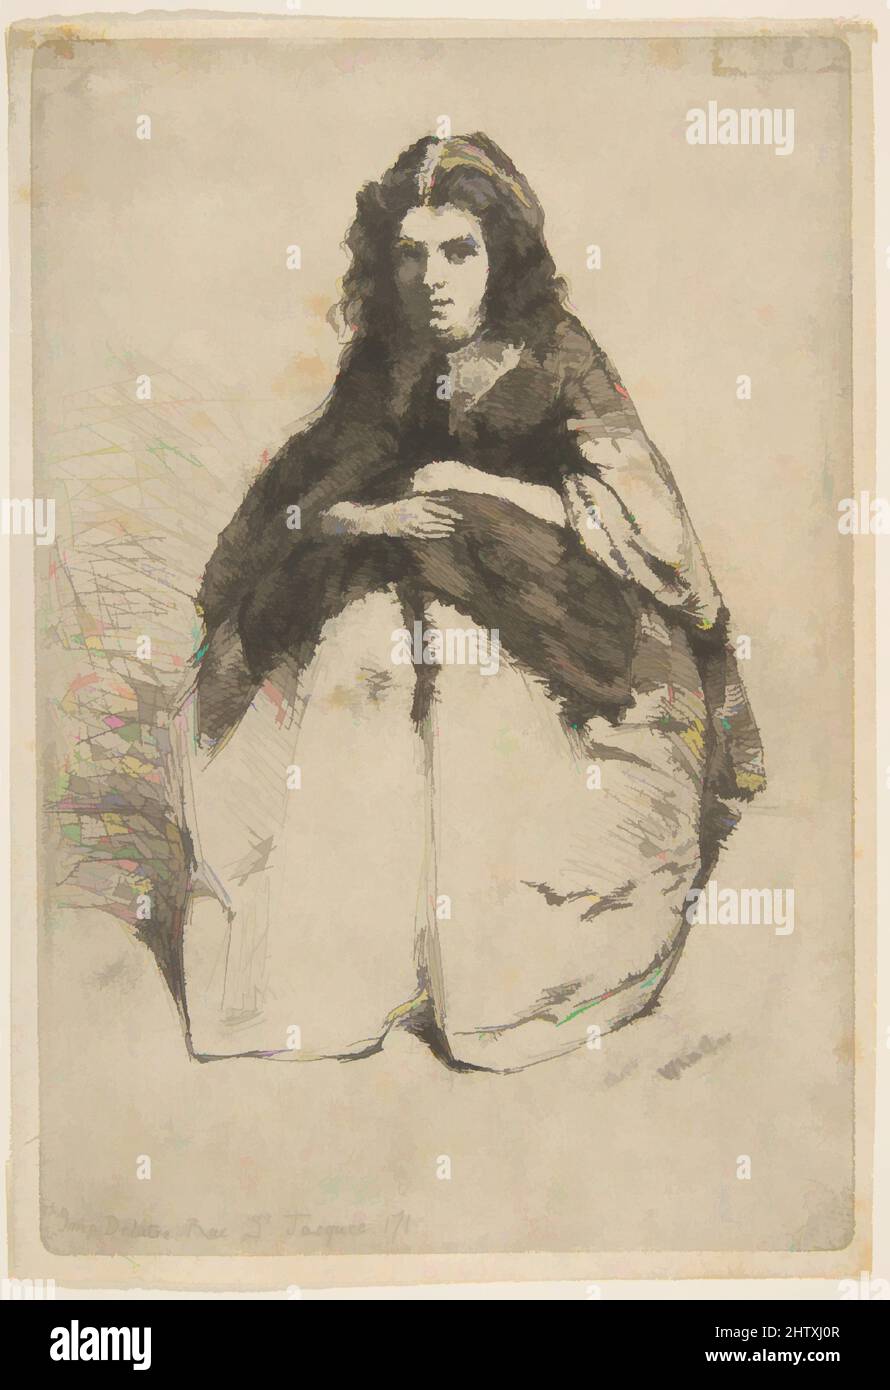 Art inspired by Fumette, 1858, Etching; fifth state of five (Glasgow); printed in black ink on fine ivory laid paper, Plate: 6 7/16 × 4 5/16 in. (16.4 × 11 cm), Prints, James McNeill Whistler (American, Lowell, Massachusetts 1834–1903 London, Classic works modernized by Artotop with a splash of modernity. Shapes, color and value, eye-catching visual impact on art. Emotions through freedom of artworks in a contemporary way. A timeless message pursuing a wildly creative new direction. Artists turning to the digital medium and creating the Artotop NFT Stock Photo